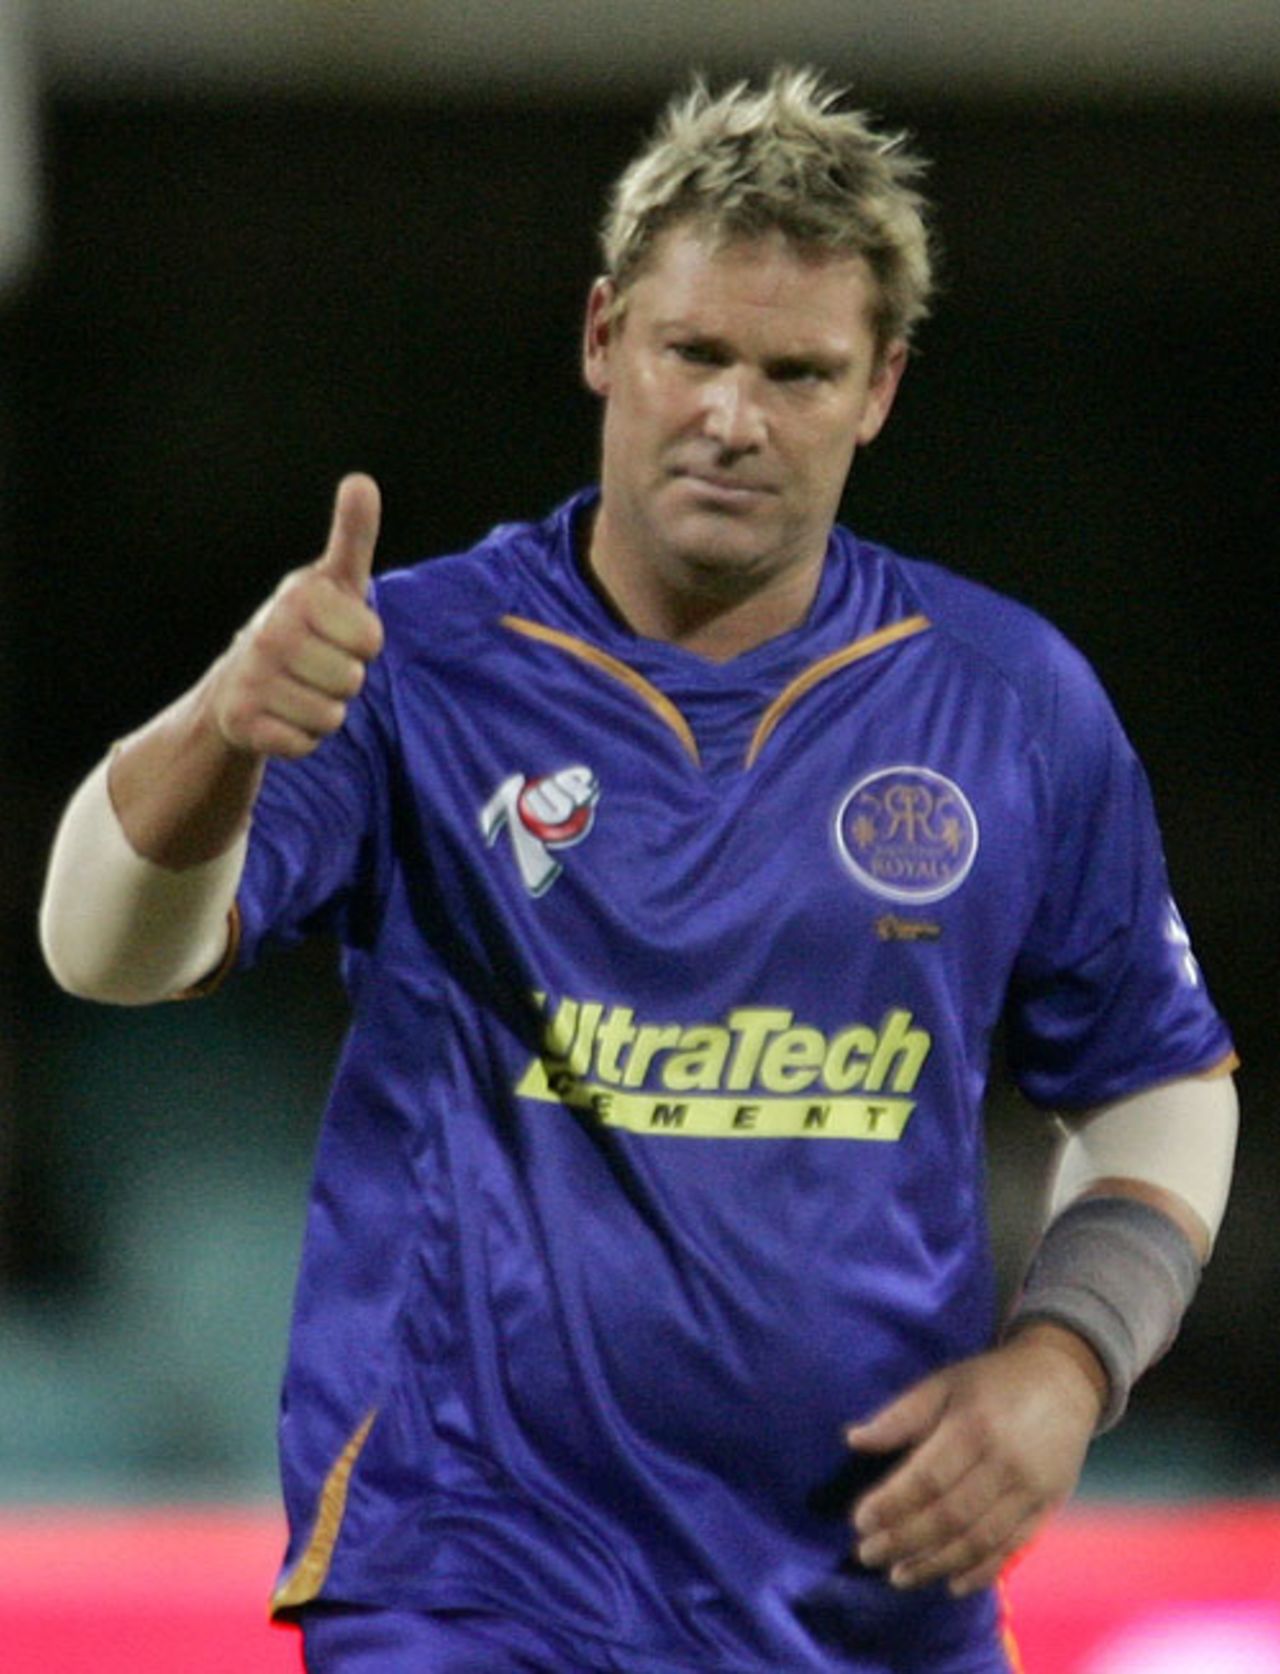 Shane Warne flashes a thumbs-up sign after dismissing Venugopal Rao, Deccan Chargers v Rajasthan Royals, IPL, 40th match, Kimberley, May 11, 2009